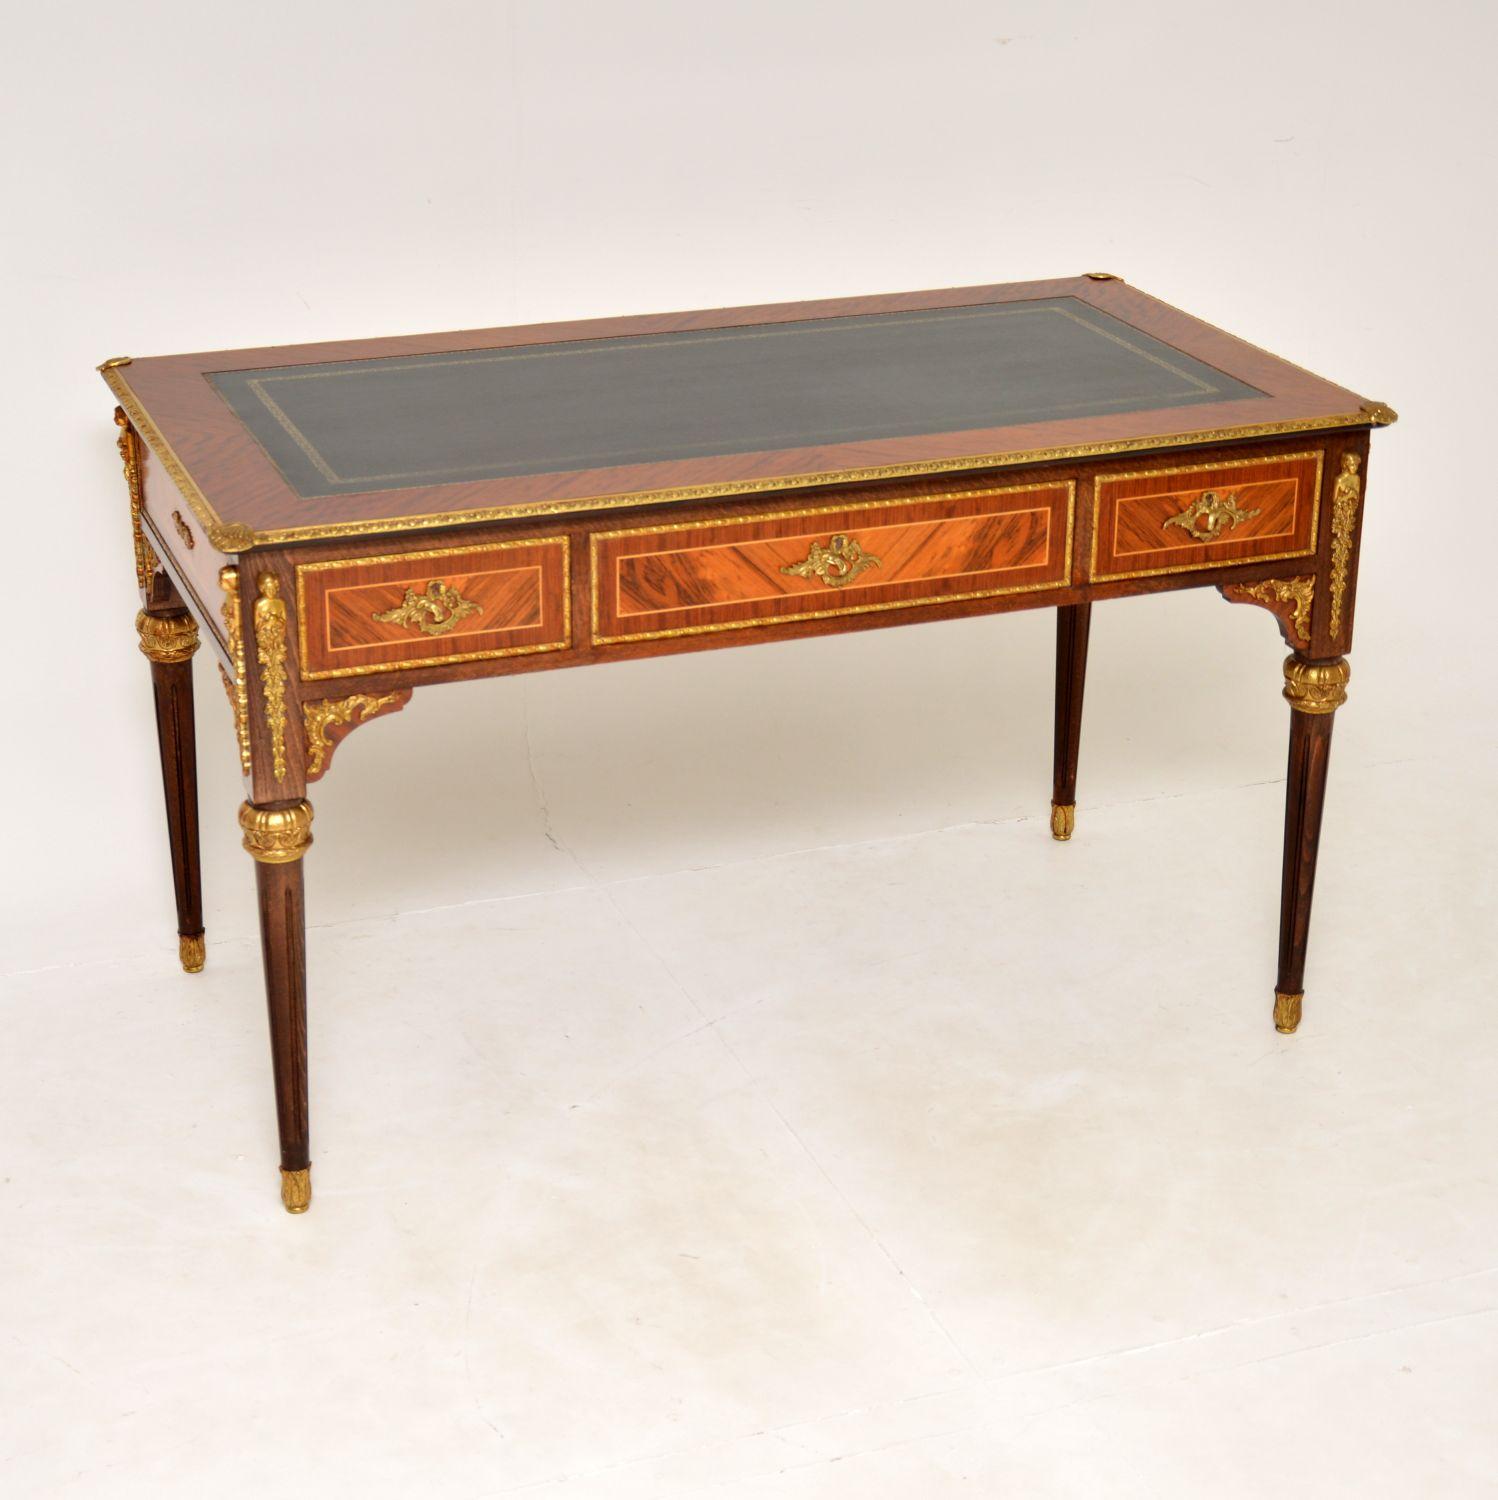 A stunning and very impressive antique French Louis XV style desk, which I would date from around the 1930-50’s period.

The quality is superb, this is very well made with lots of intricate details. There are fine quality gilt bronze ormolou